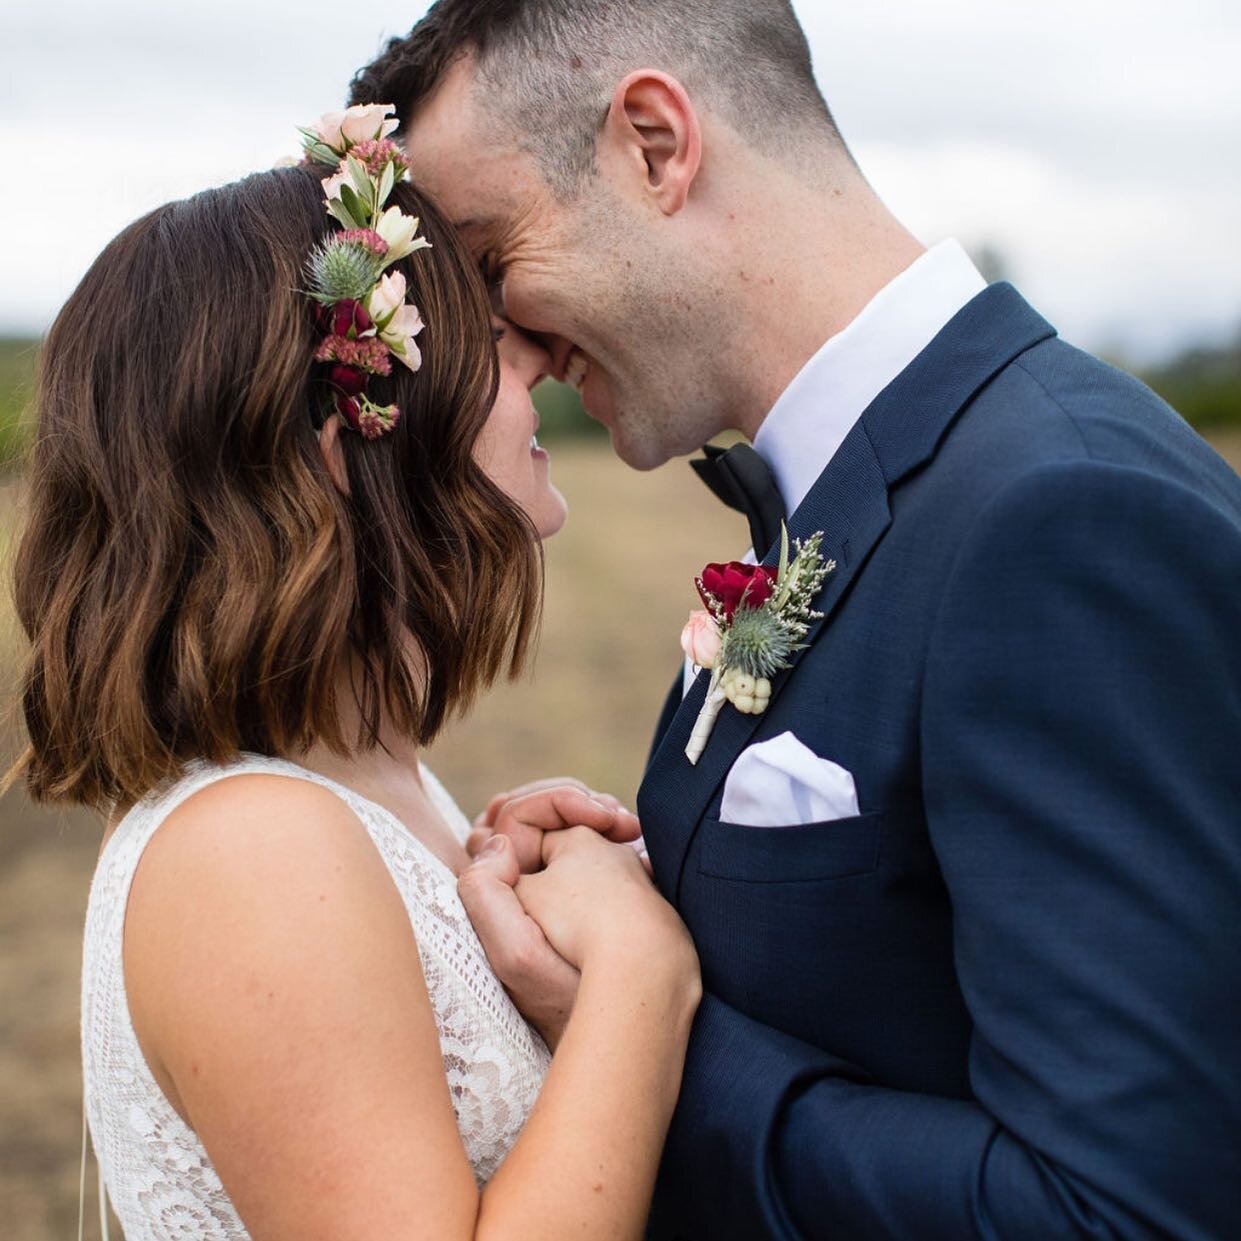 Your elopement or micro wedding may be on a smaller scale in size, but it&rsquo;s still big on love. 💕
📷 @ariaphotographyaus 

#elopeyv #elopeyarravalley #elopementspecialists #elopevictoria #microwedding #miniwedding #elopement #elopeaustralia #el